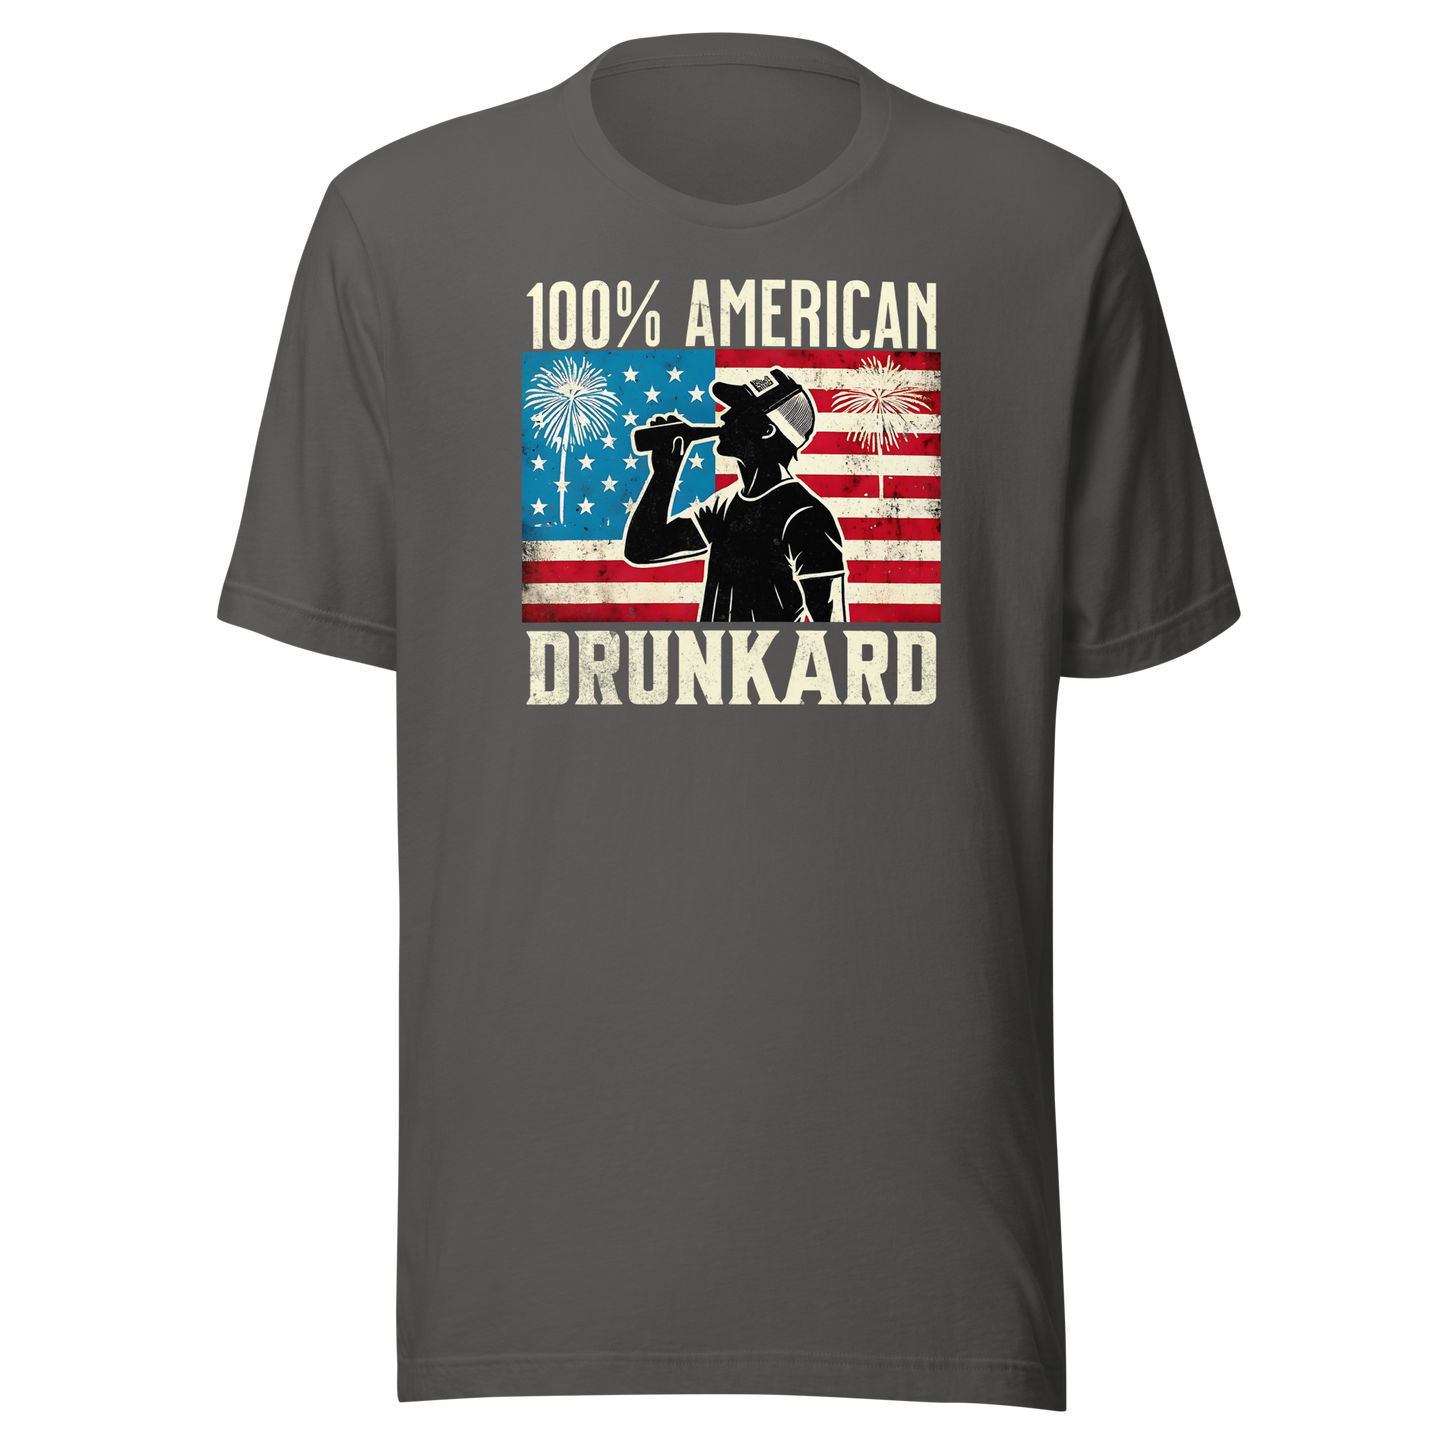 4th of July T-shirt with '100% American Drunkard' text, man drinking a bottle of beer wearing a trucker hat, and distressed American flag background